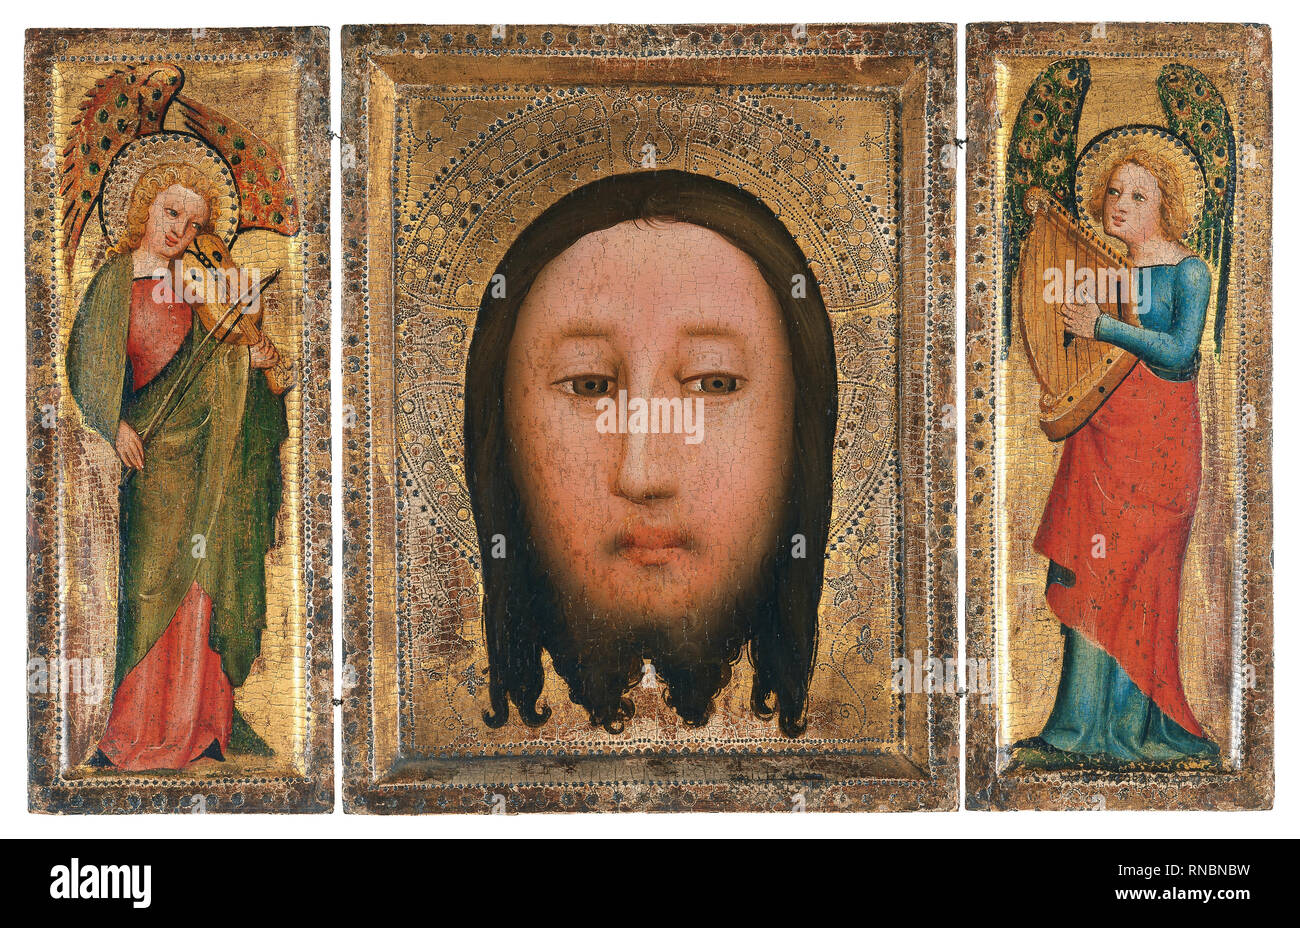 Master Bertram (Minden (?), ca. 1330/40-Hamburg, 1414/15). Triptych of The Holy Face (ca. 1390 - 1400). Oil on panel. Central panel: 30.8 x 24.2 cm; lateral wings: 30.8 x 12 cm each. Triptych closed: The Annuciation. Museum: Museo Nacional Thyssen-Bornemisza, Madrid. Stock Photo